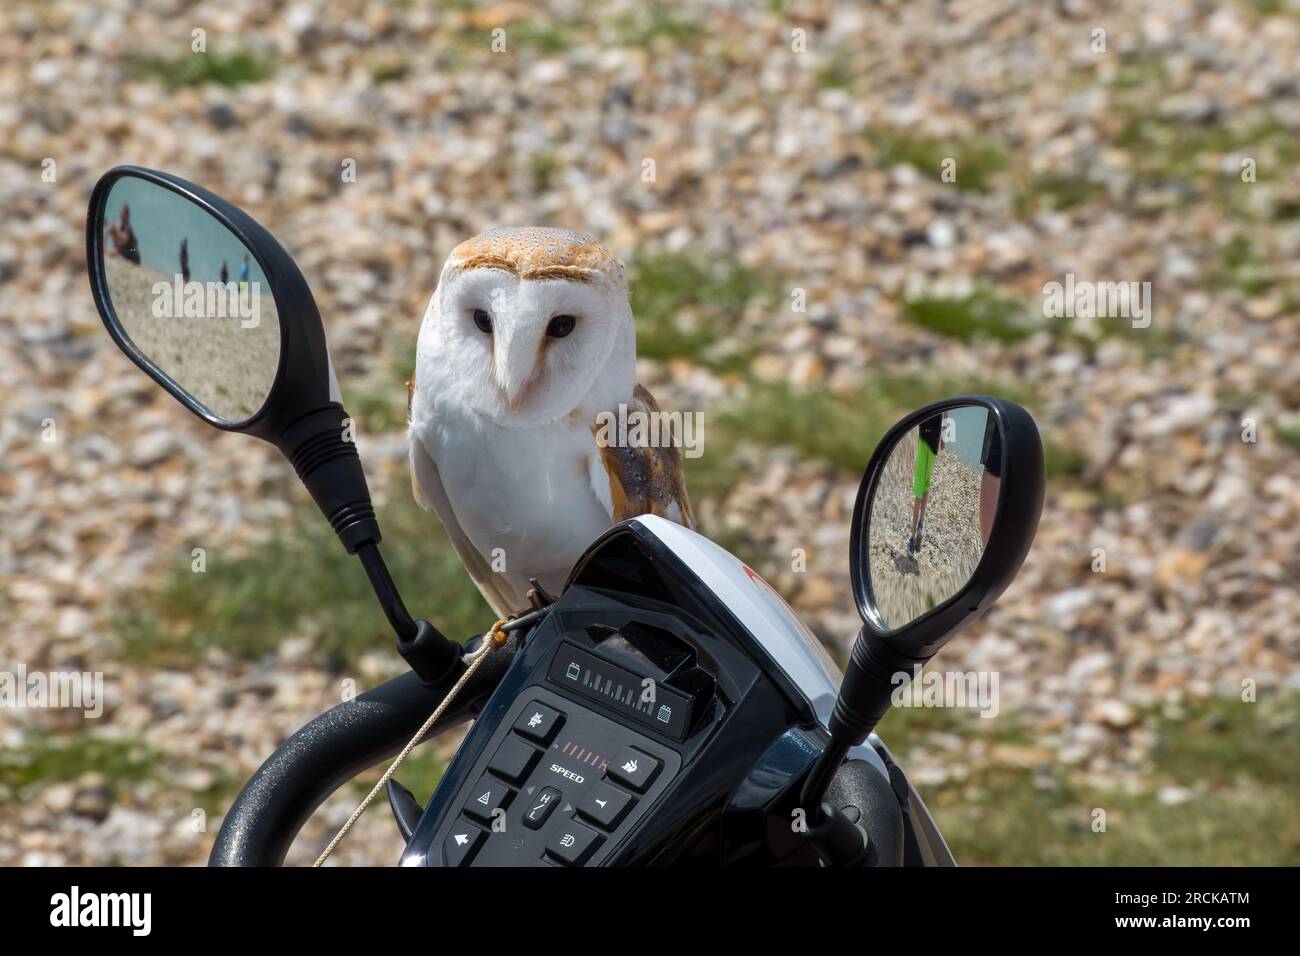 barn owl tyto alba perched on the handlebars of a mobility scooter Stock Photo